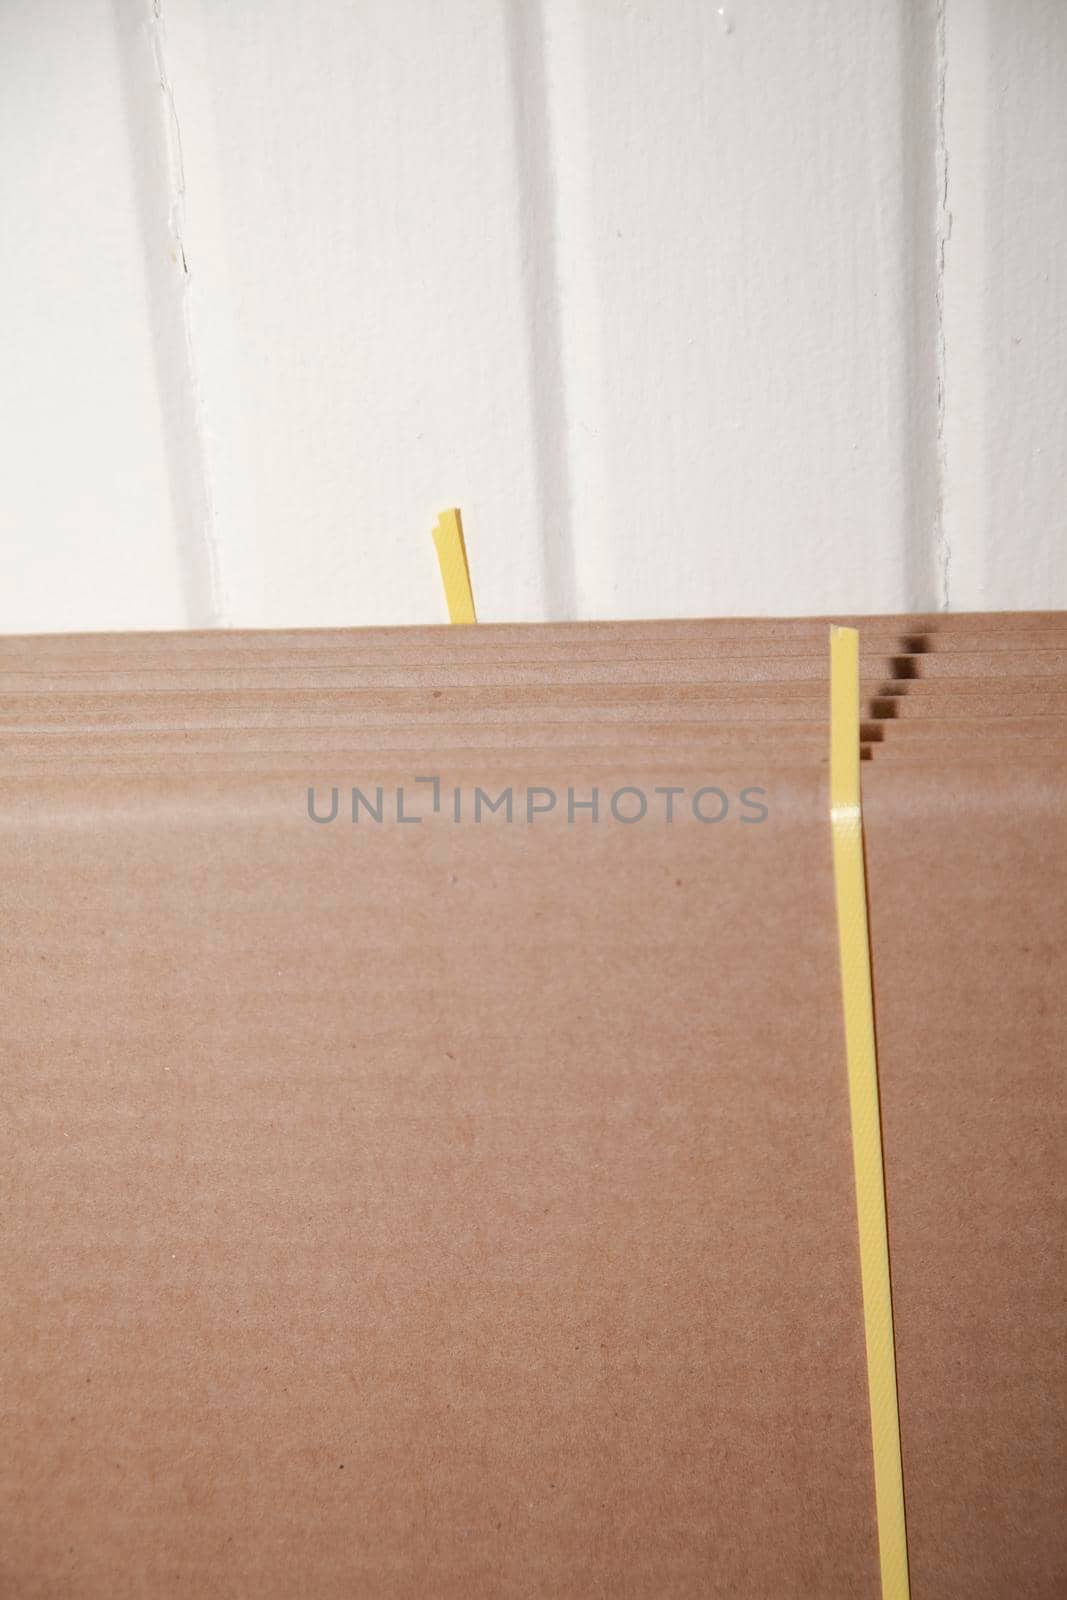 Seven unused, flattened cardboard boxes in an open package with cut yellow bounding